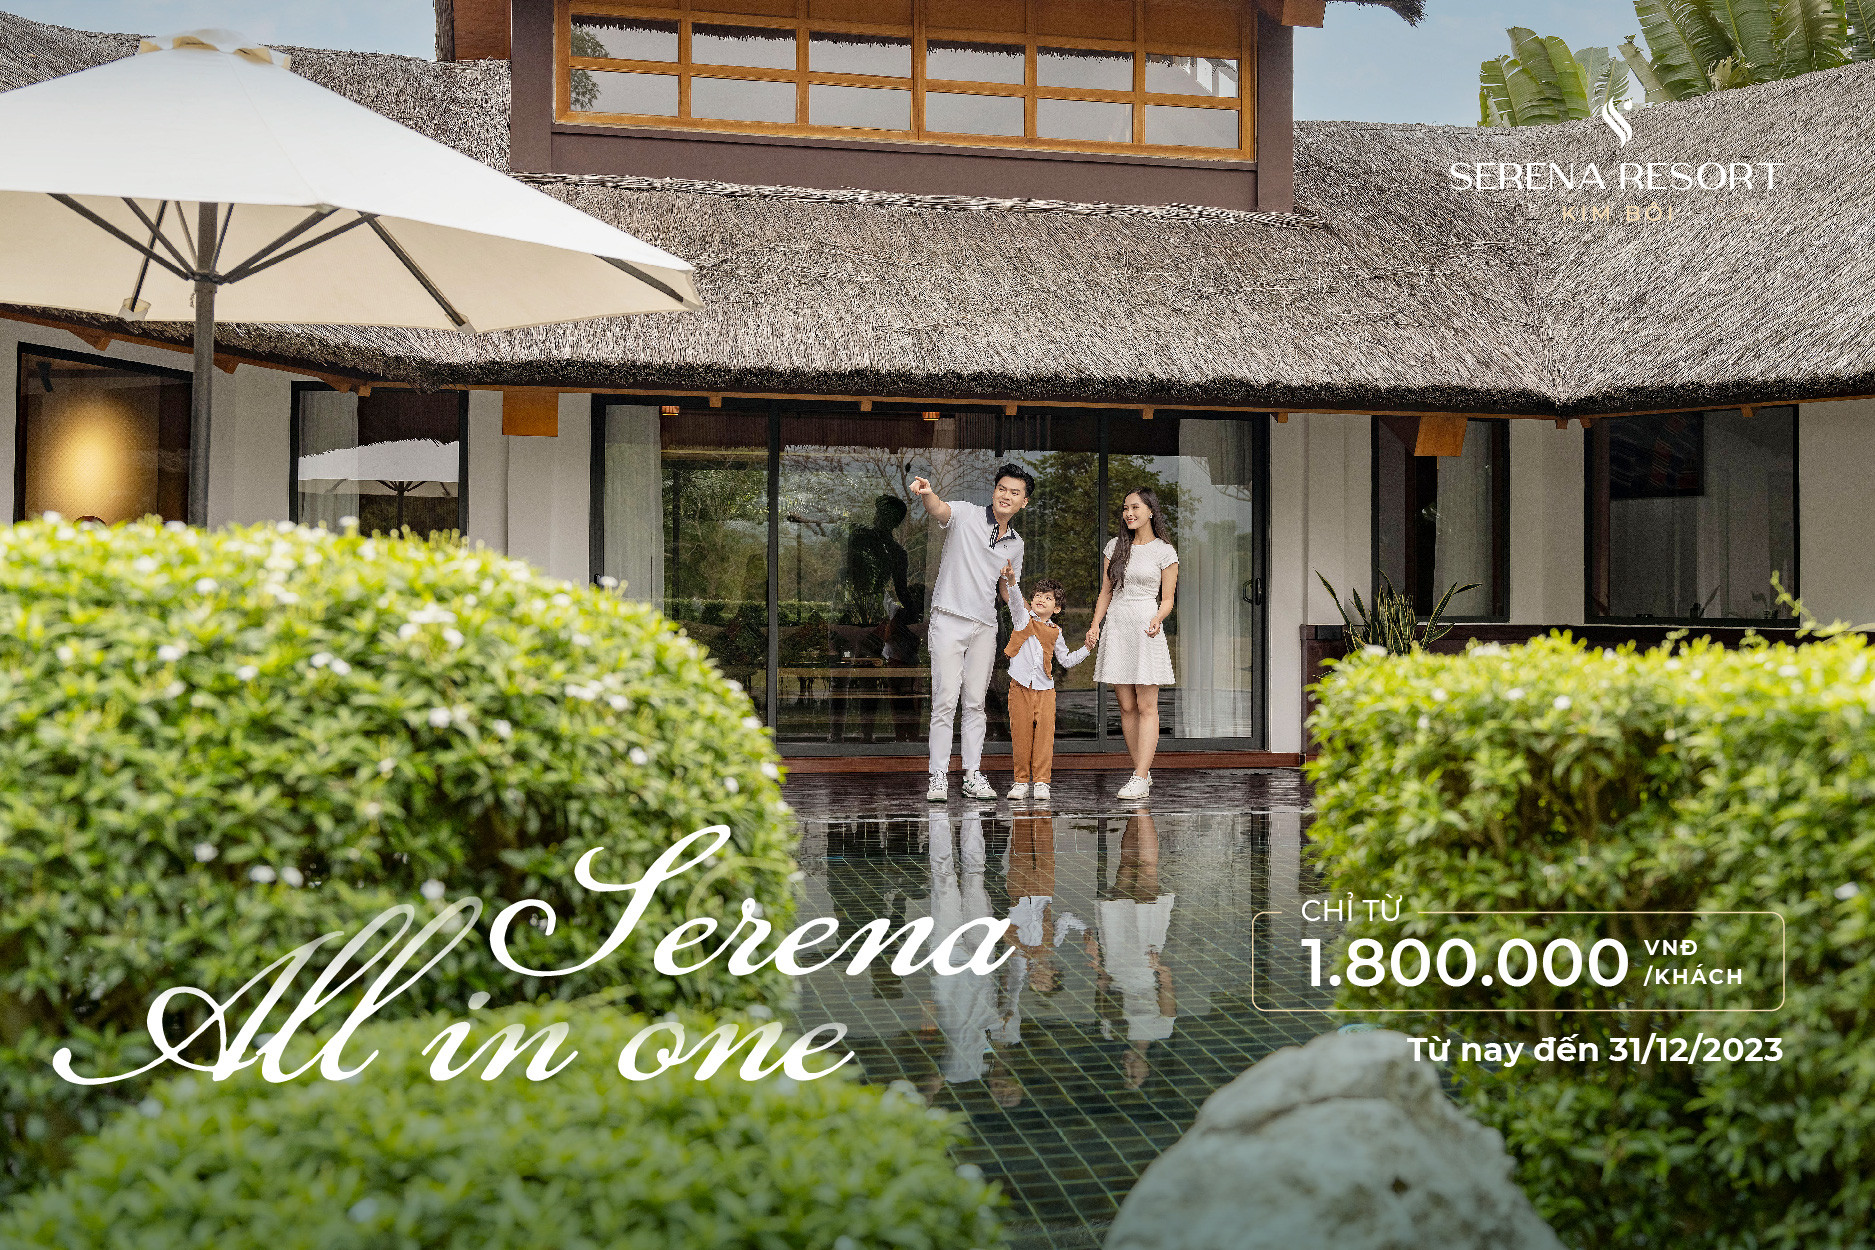 SERENA ALL IN ONE: ACCOMODATION AND CUISINE PACKAGE